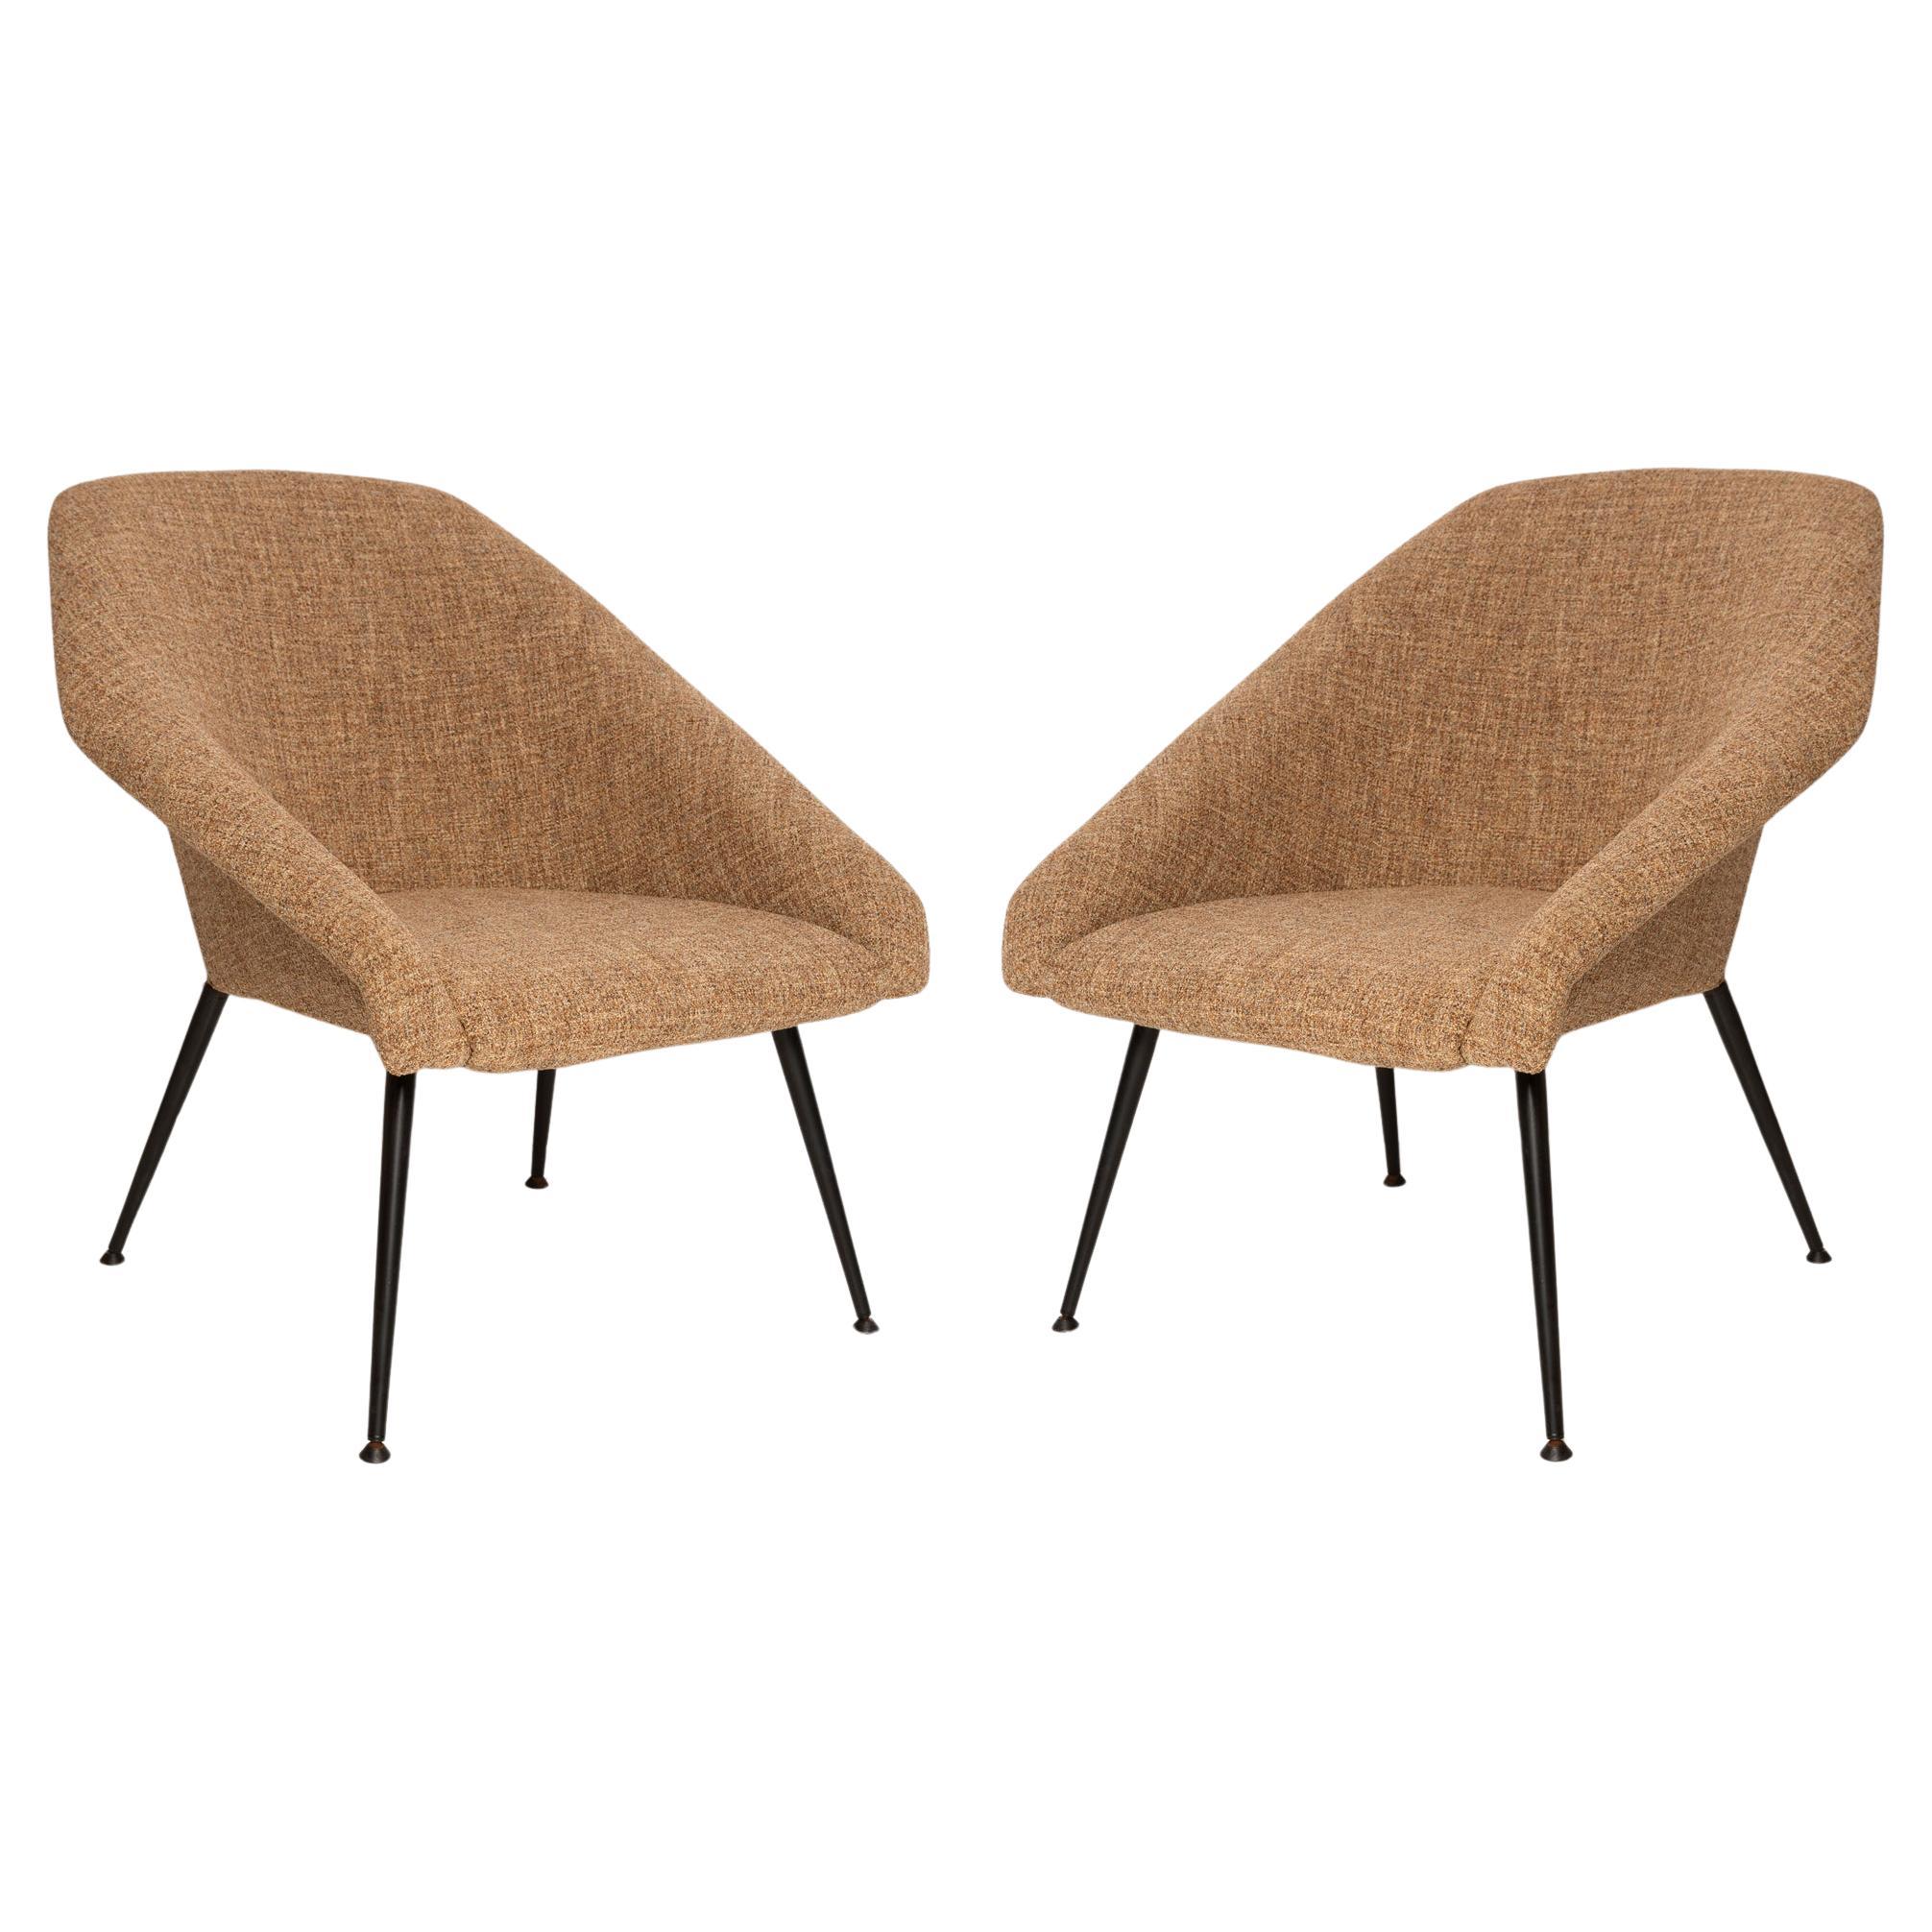 Set of Two 20th Century Beige "Eva" Club Armchairs, 1960s For Sale